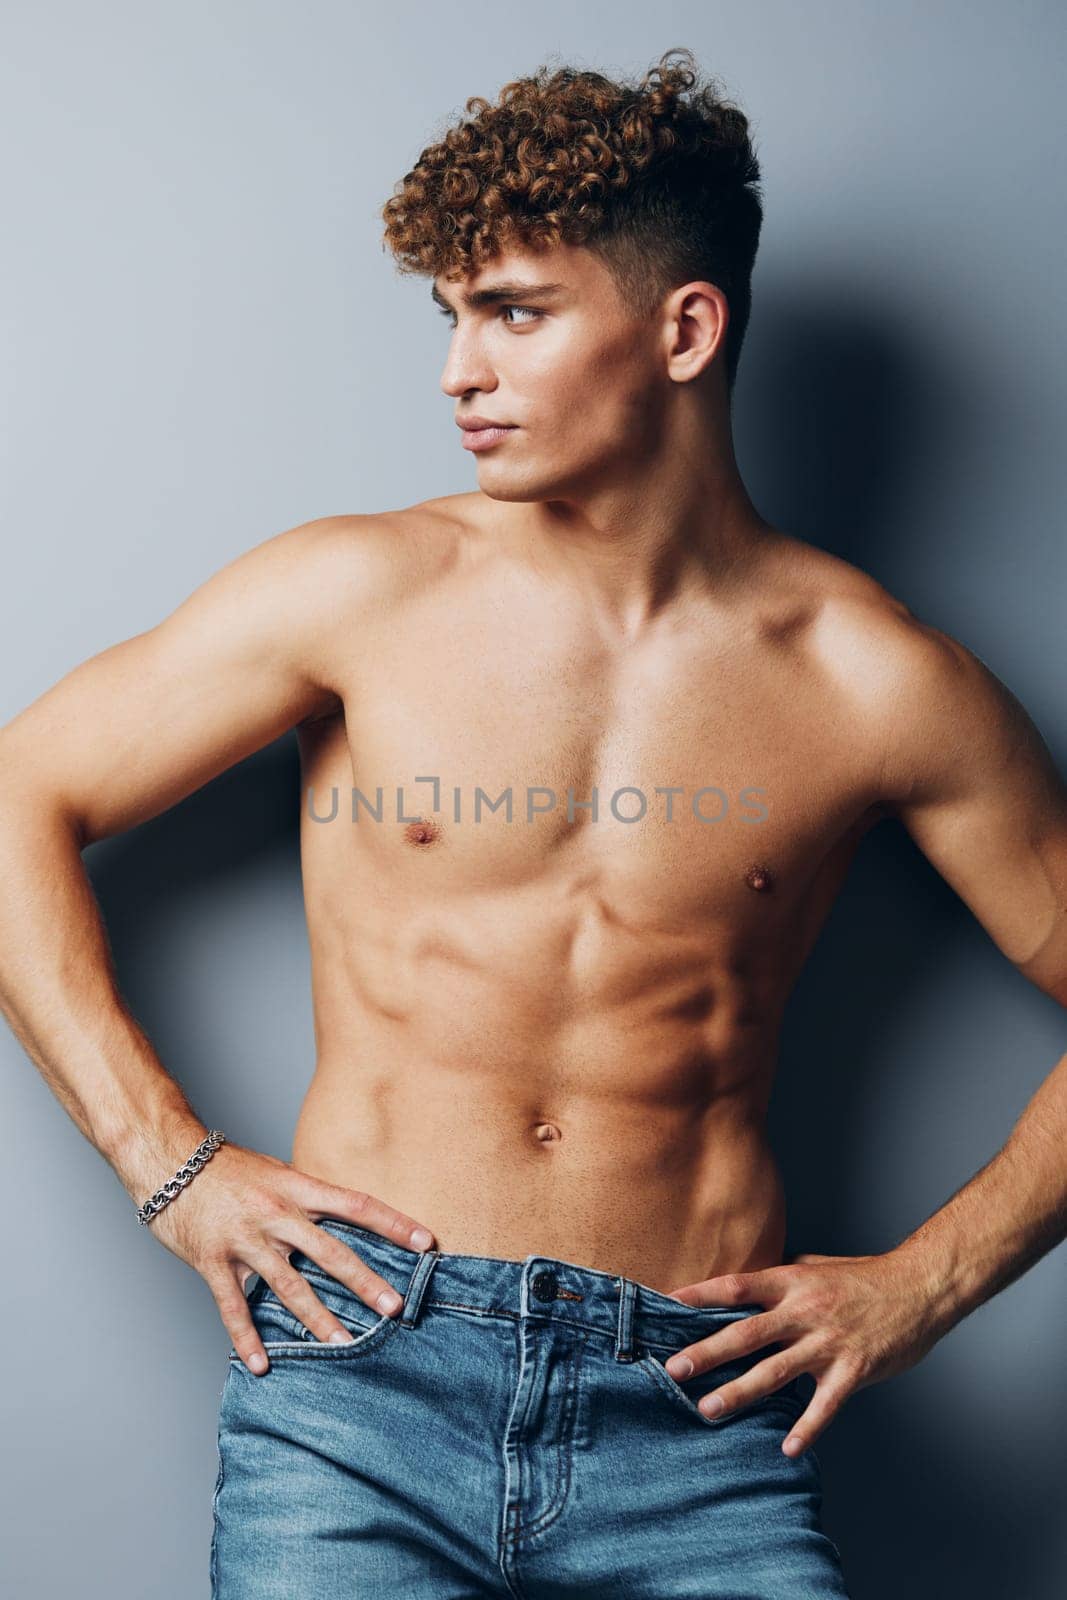 man studio abs muscular model beauty shirtless male handsome jeans smile fit body standing muscle fashion athlete healthy